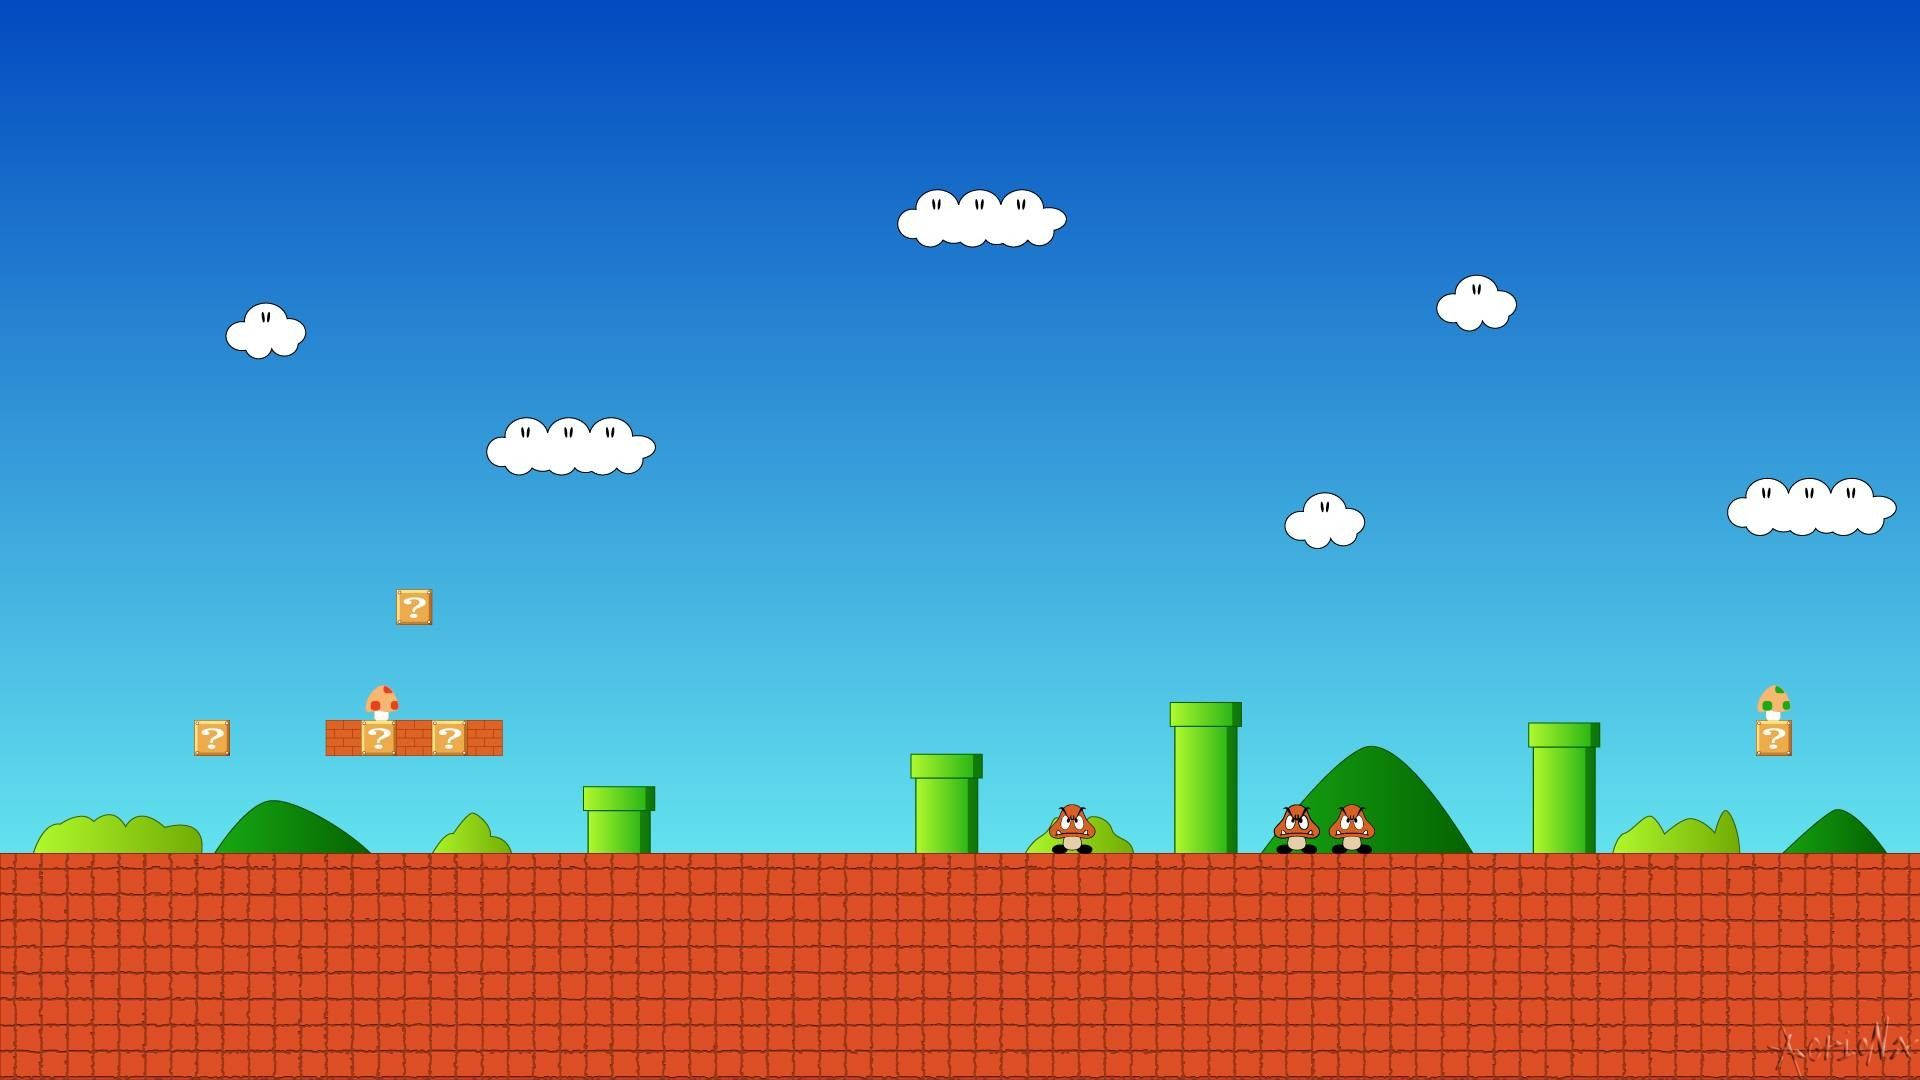 A Mario Bros Game With A Sky And Clouds Background